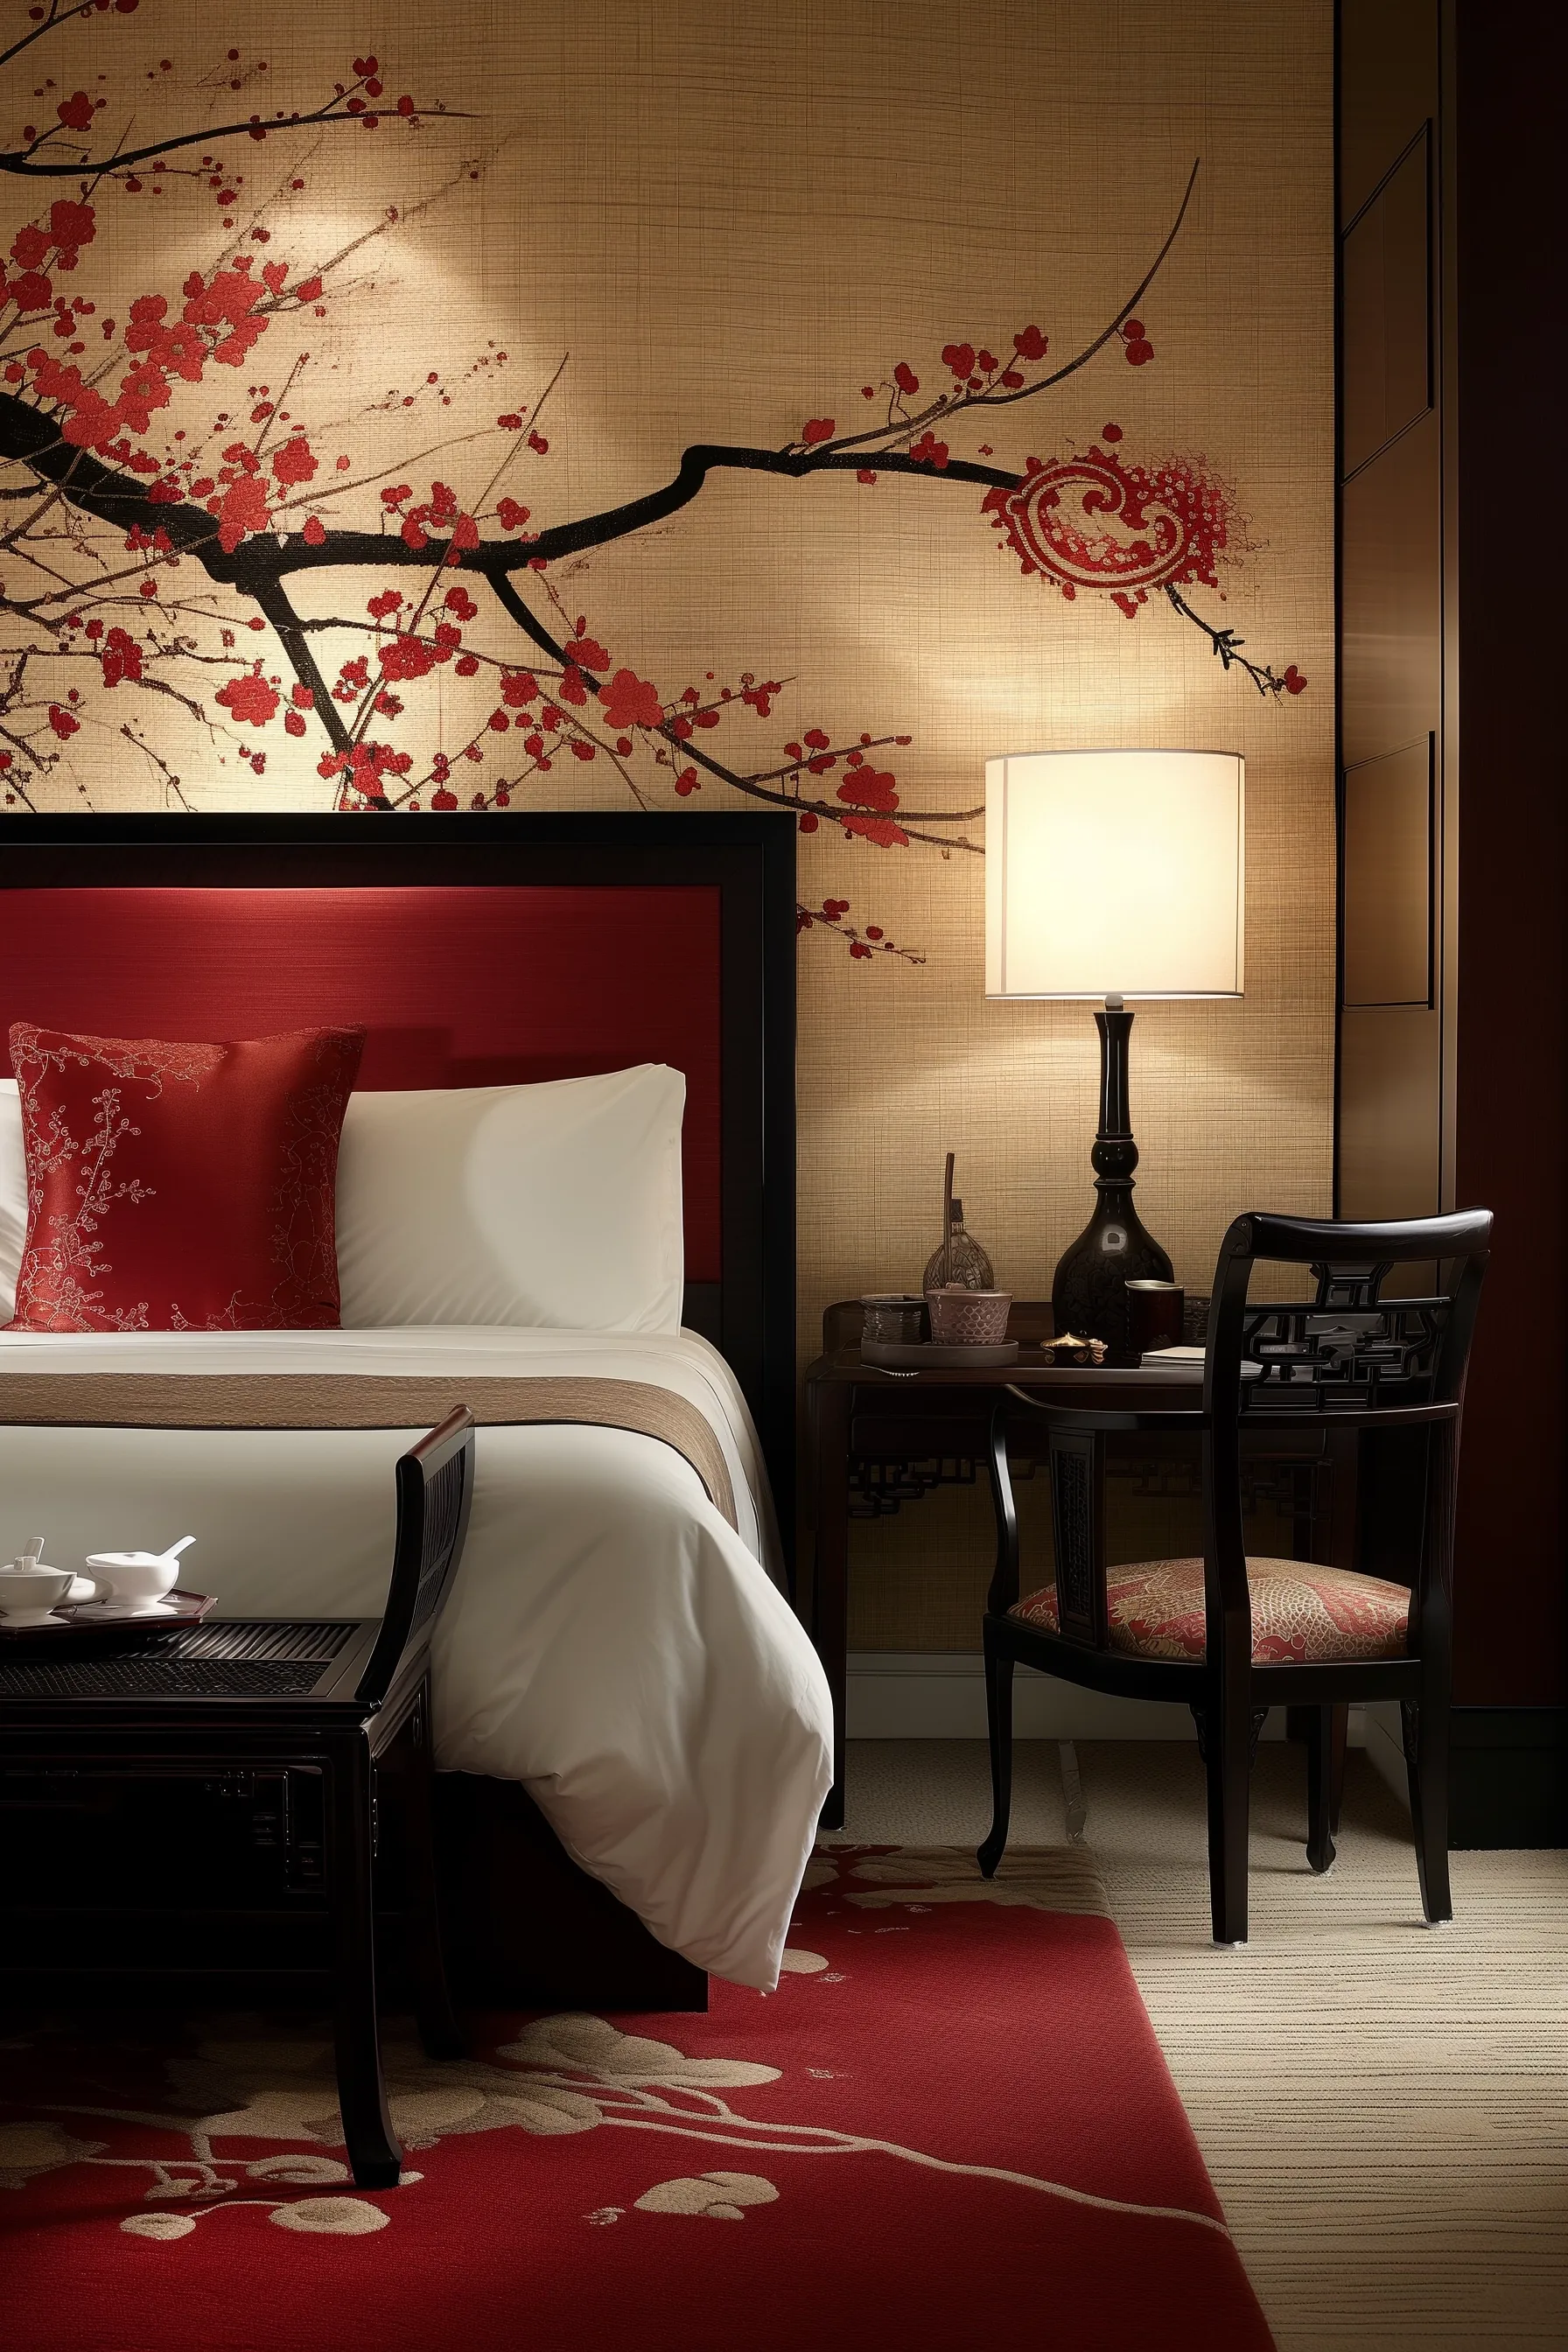 A red floral Asian bedroom